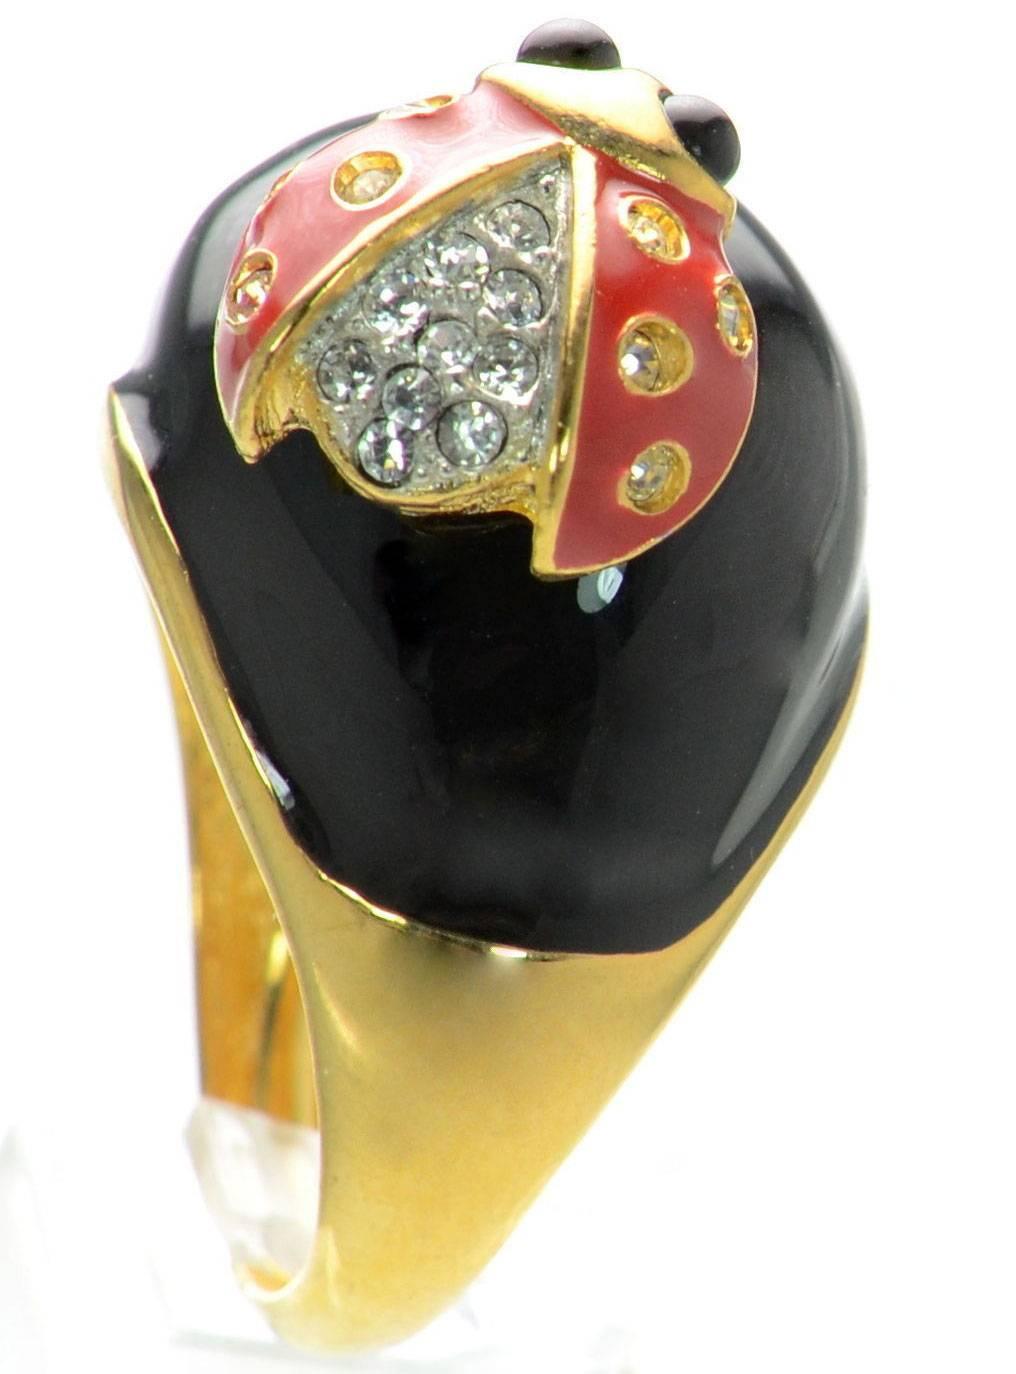 Exceptional Ladybug Statement Ring Red and Black enamel; set with Sparkling Faux Diamonds by Kenneth J Lane; Size 9.5; Signed: KJL MADE IN USA. Add Pizazz, Glamor and Fun to your Outfit!
